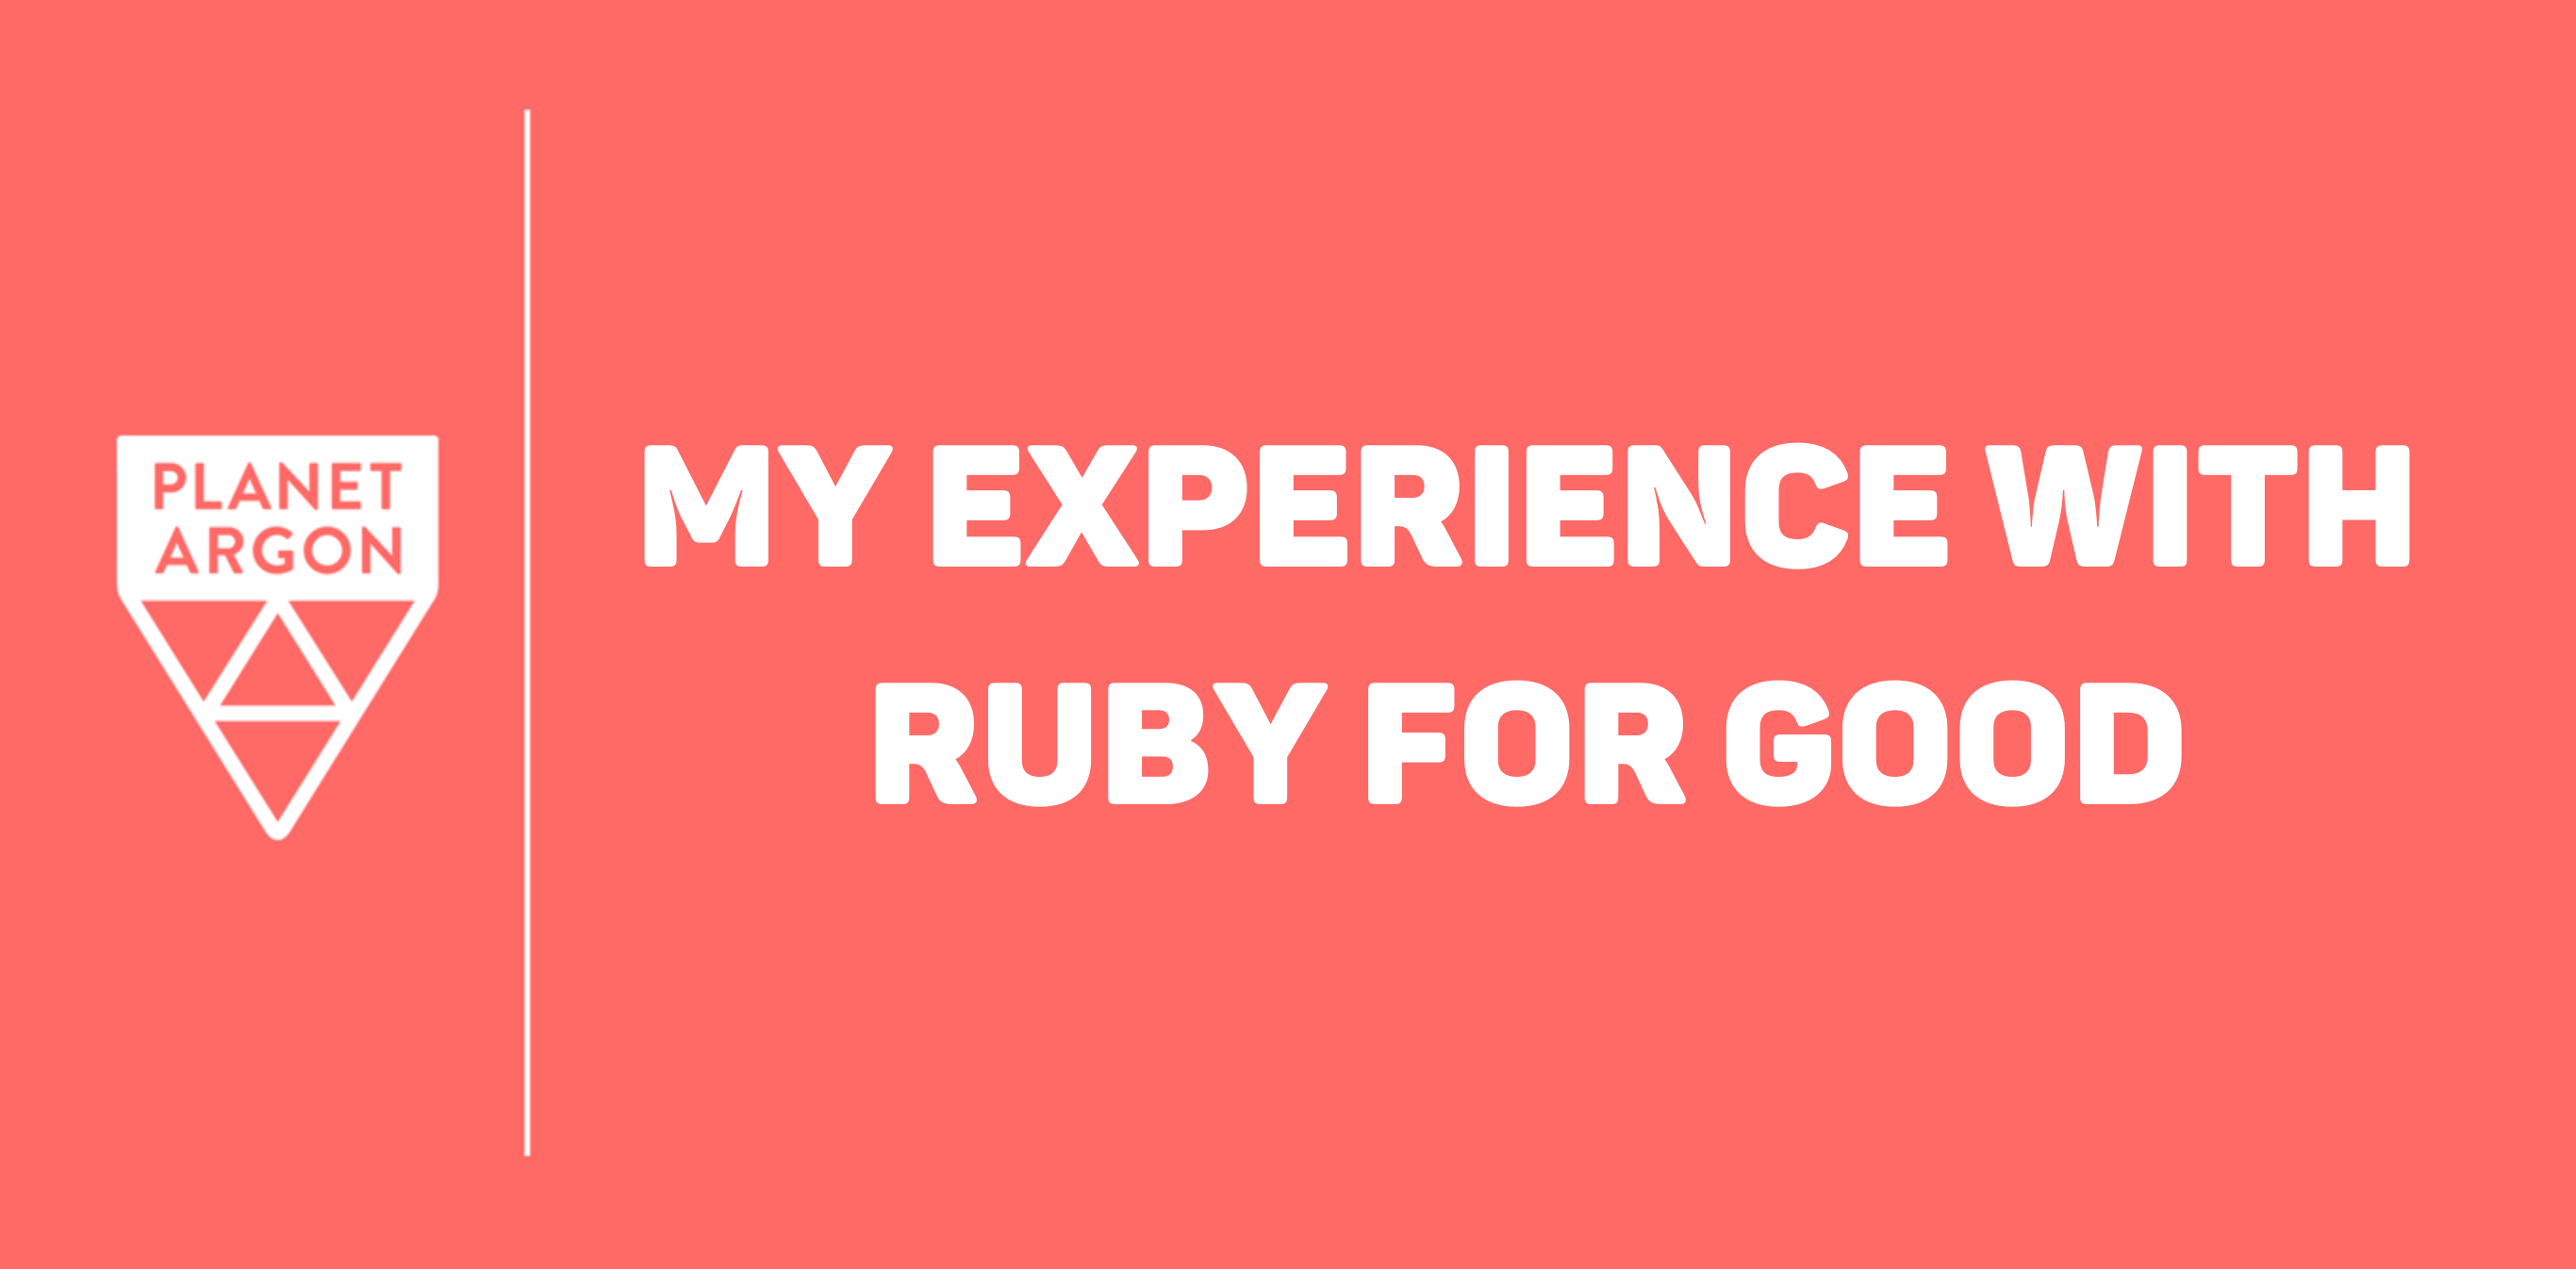 My Experience with Ruby for Good